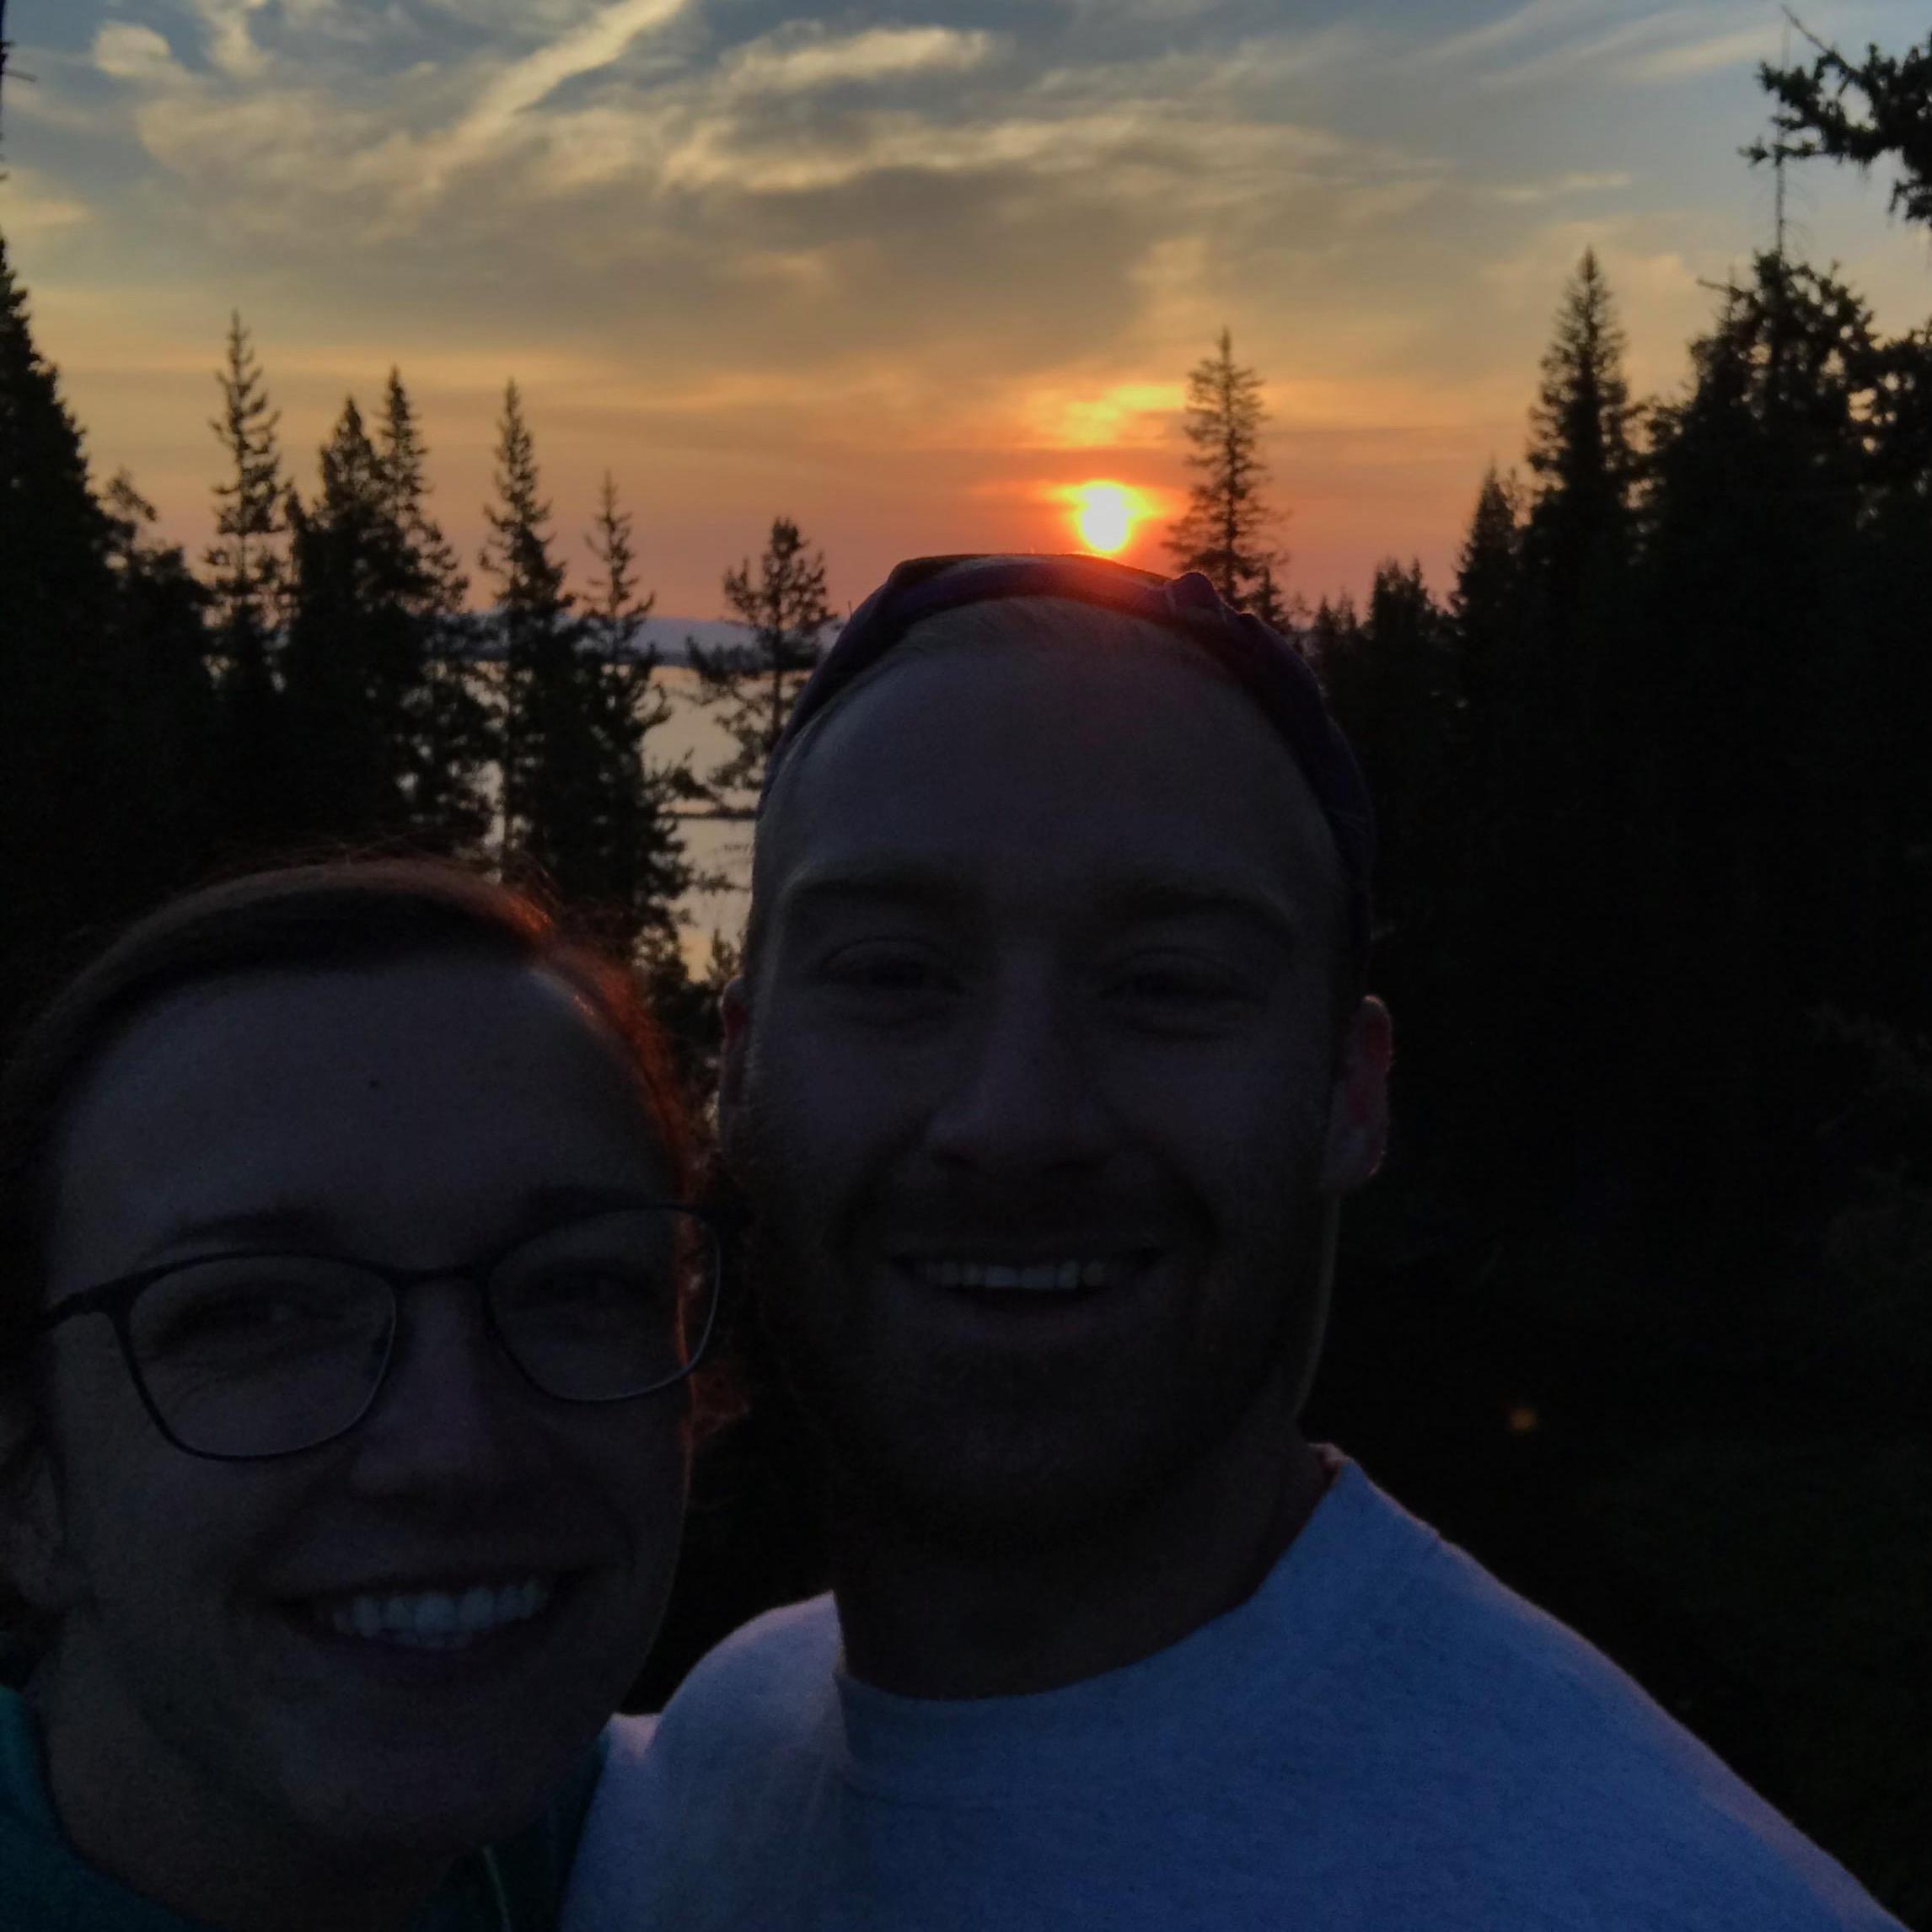 Our first sunrise together!! Woke up early to try and get a campsite at Jenny Lake - not early enough, apparently. But our backup wasn't so bad!